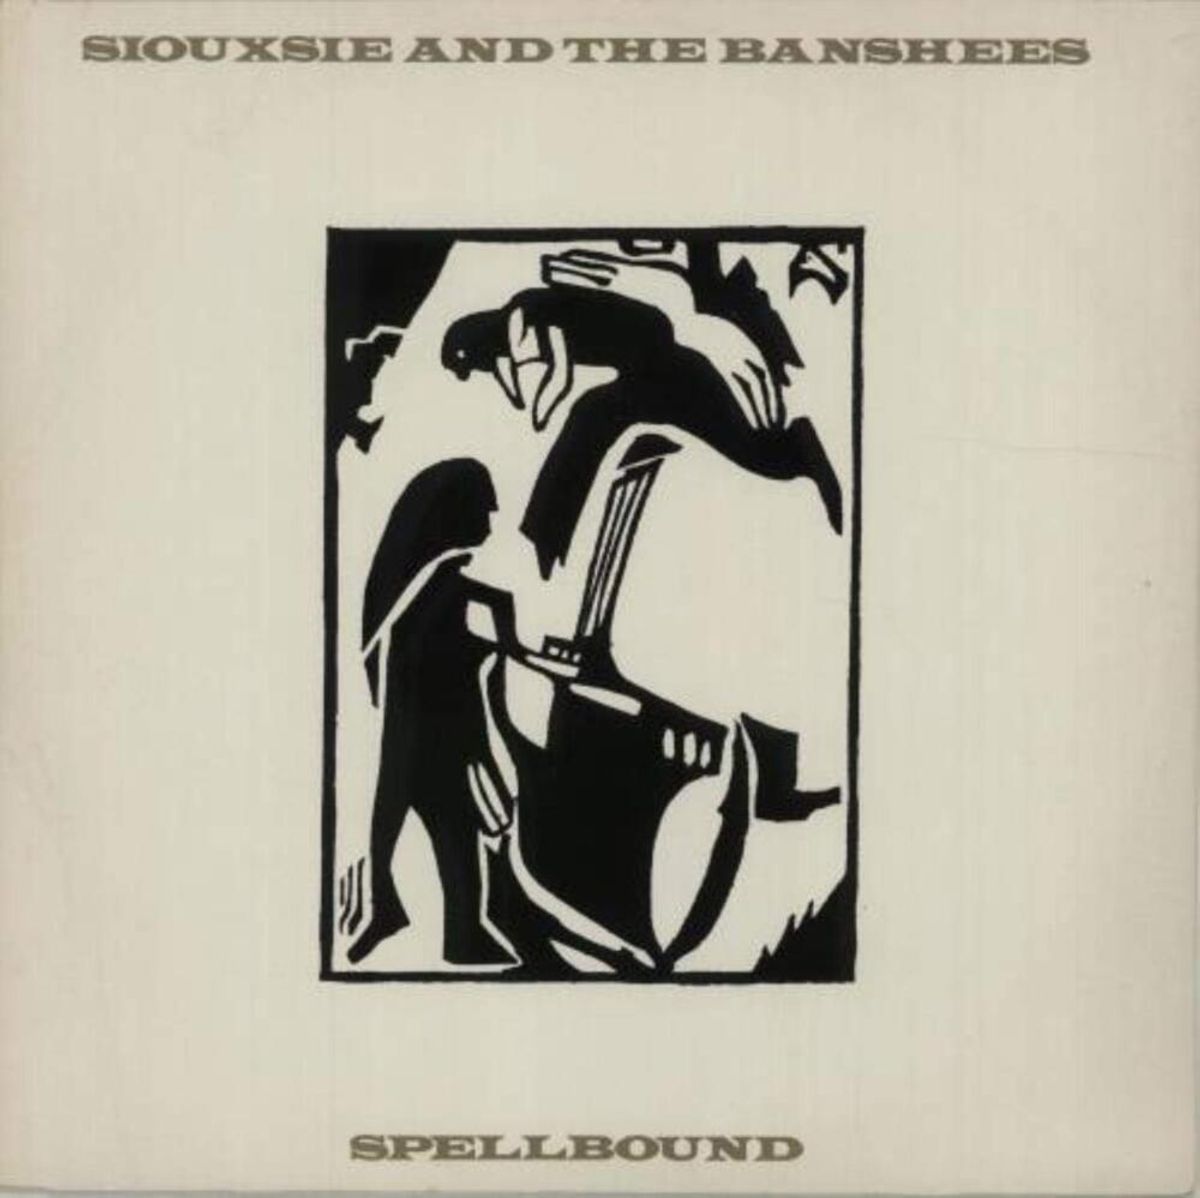 #Lollapalooza91 - Siouxsie And The Banshees - Spellbound (1981)